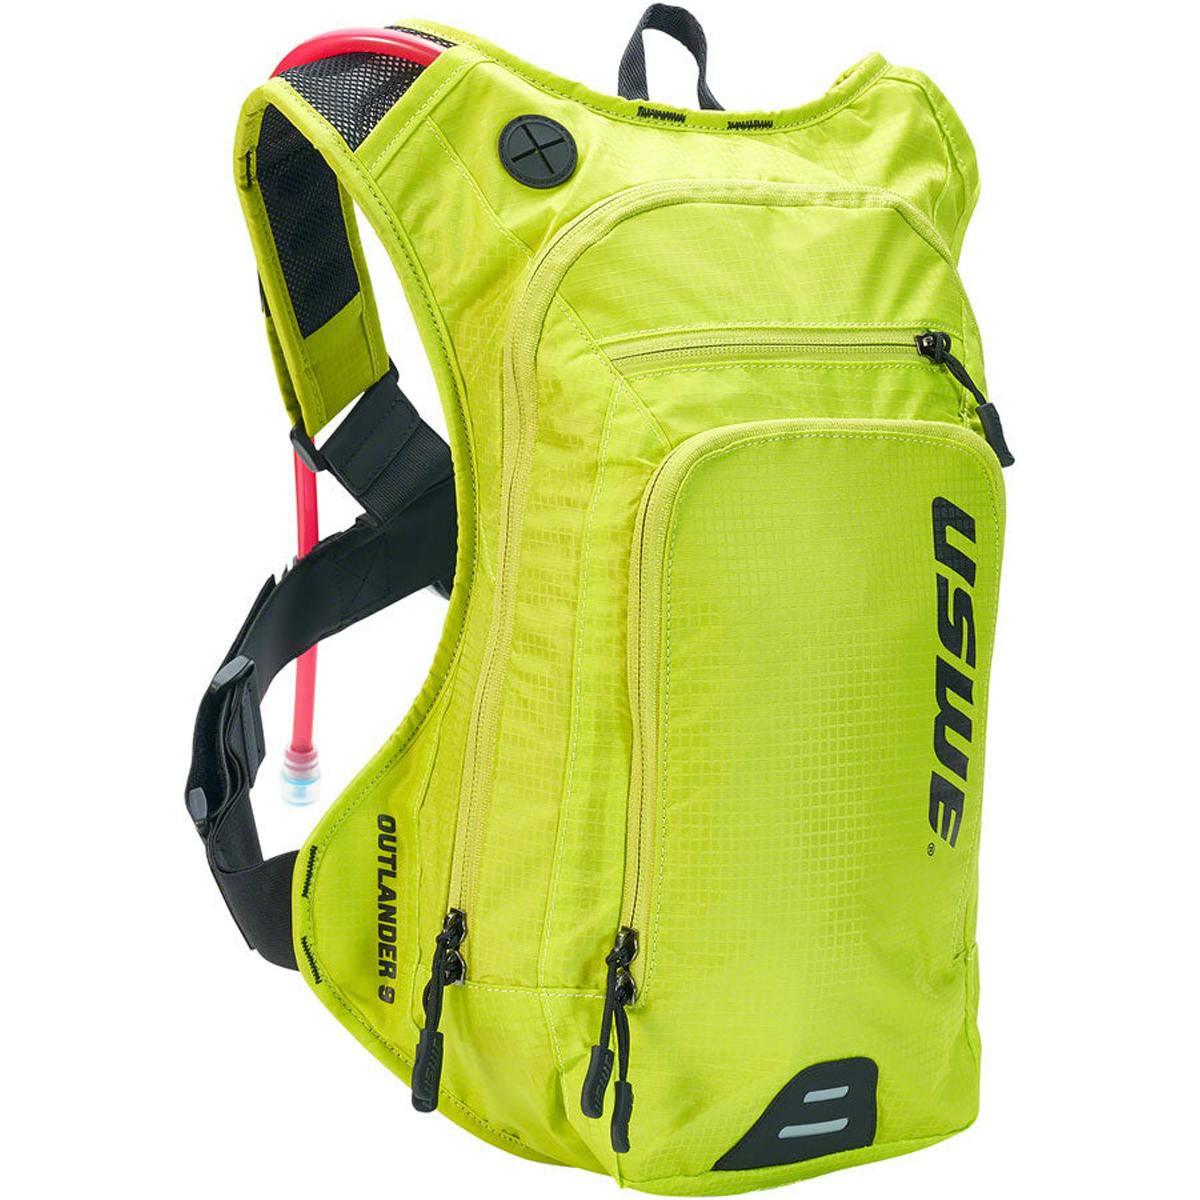 USWE Outlander 9 Hydration Pack - Crazy Yellow - 9L